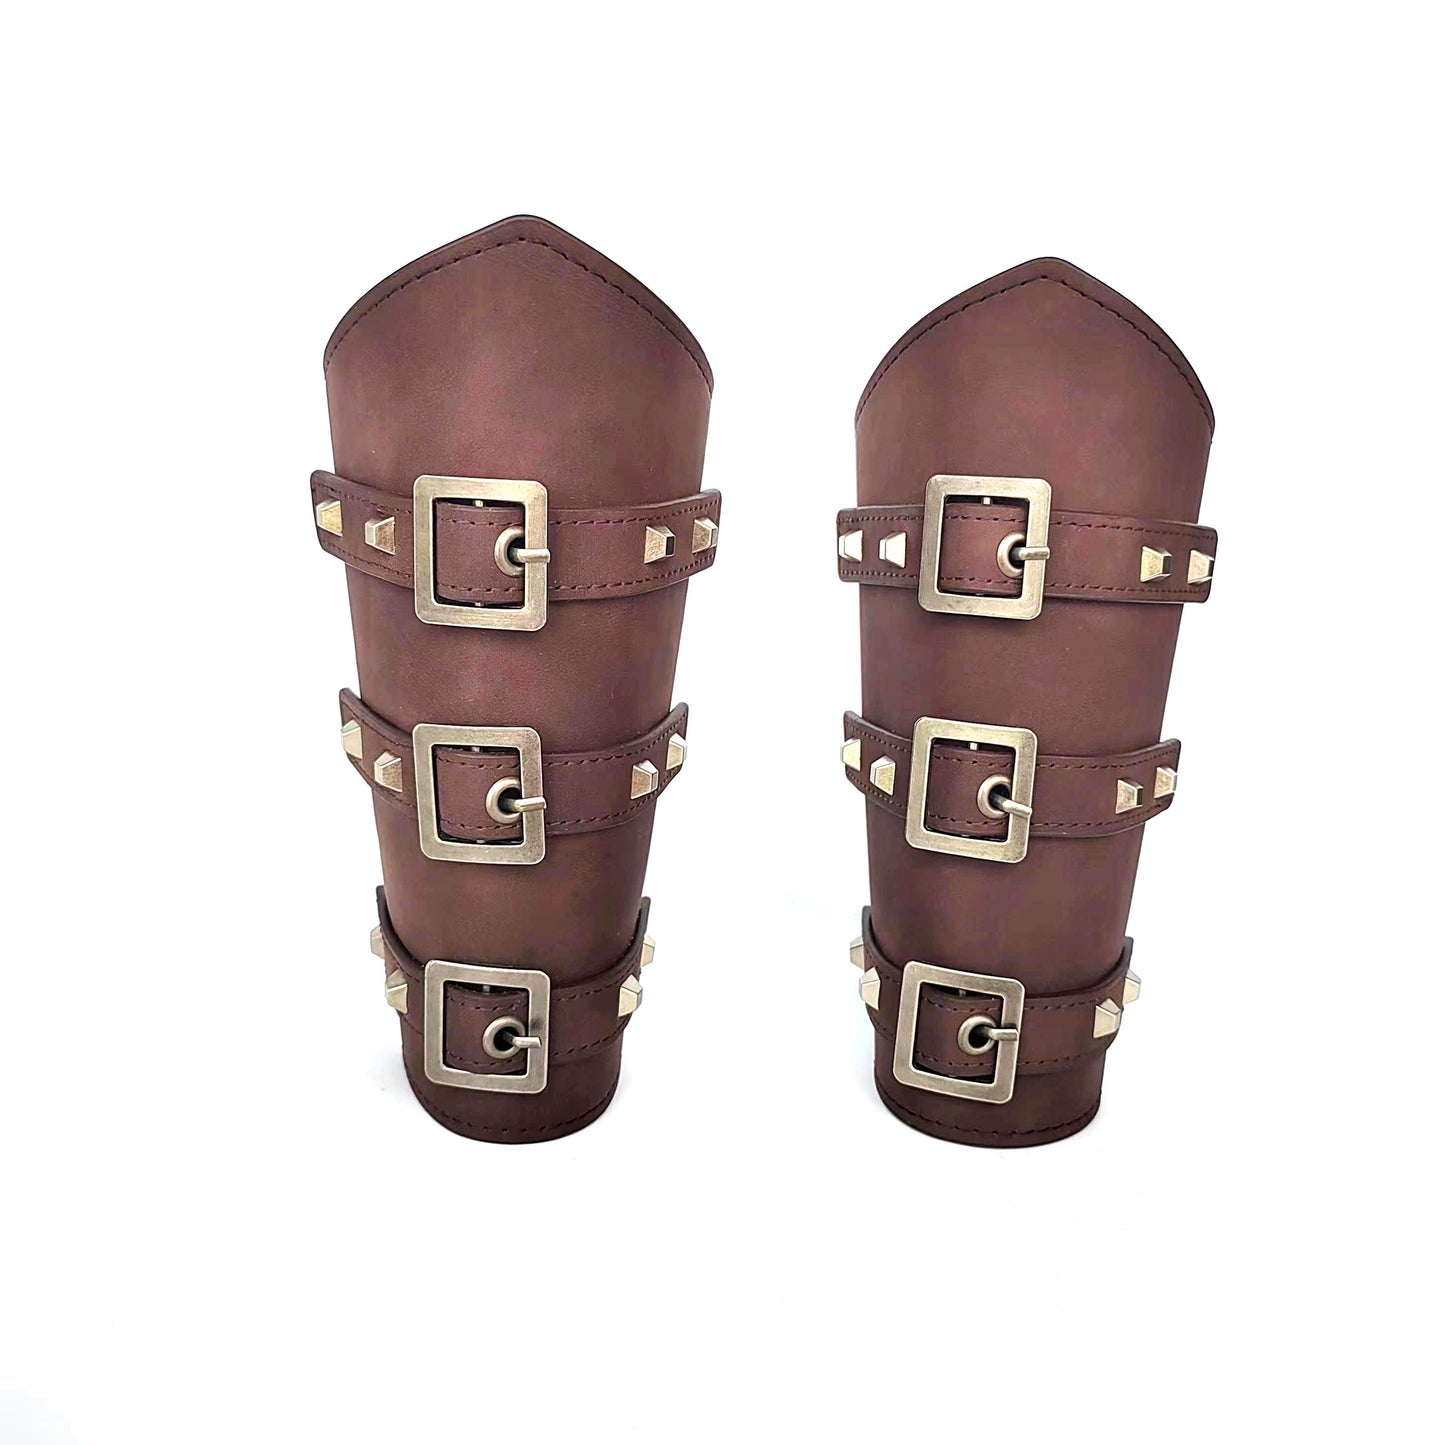 A pair of Medieval Cosplay Retro Steampunk Archery Wristband with gold buckles by Maramalive™.